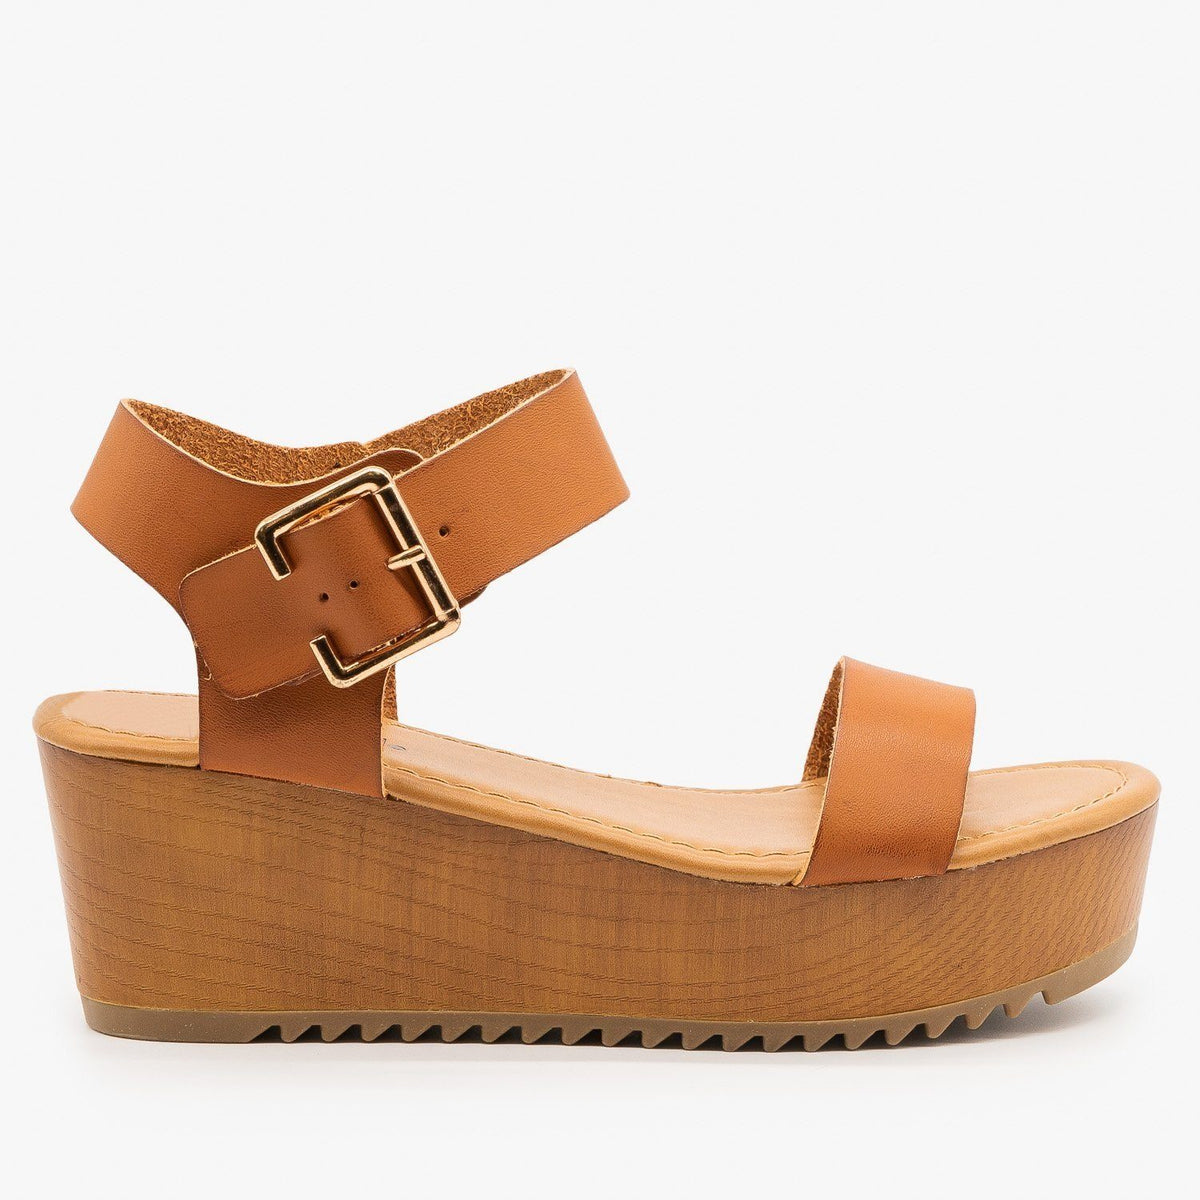 tan wooden wedges